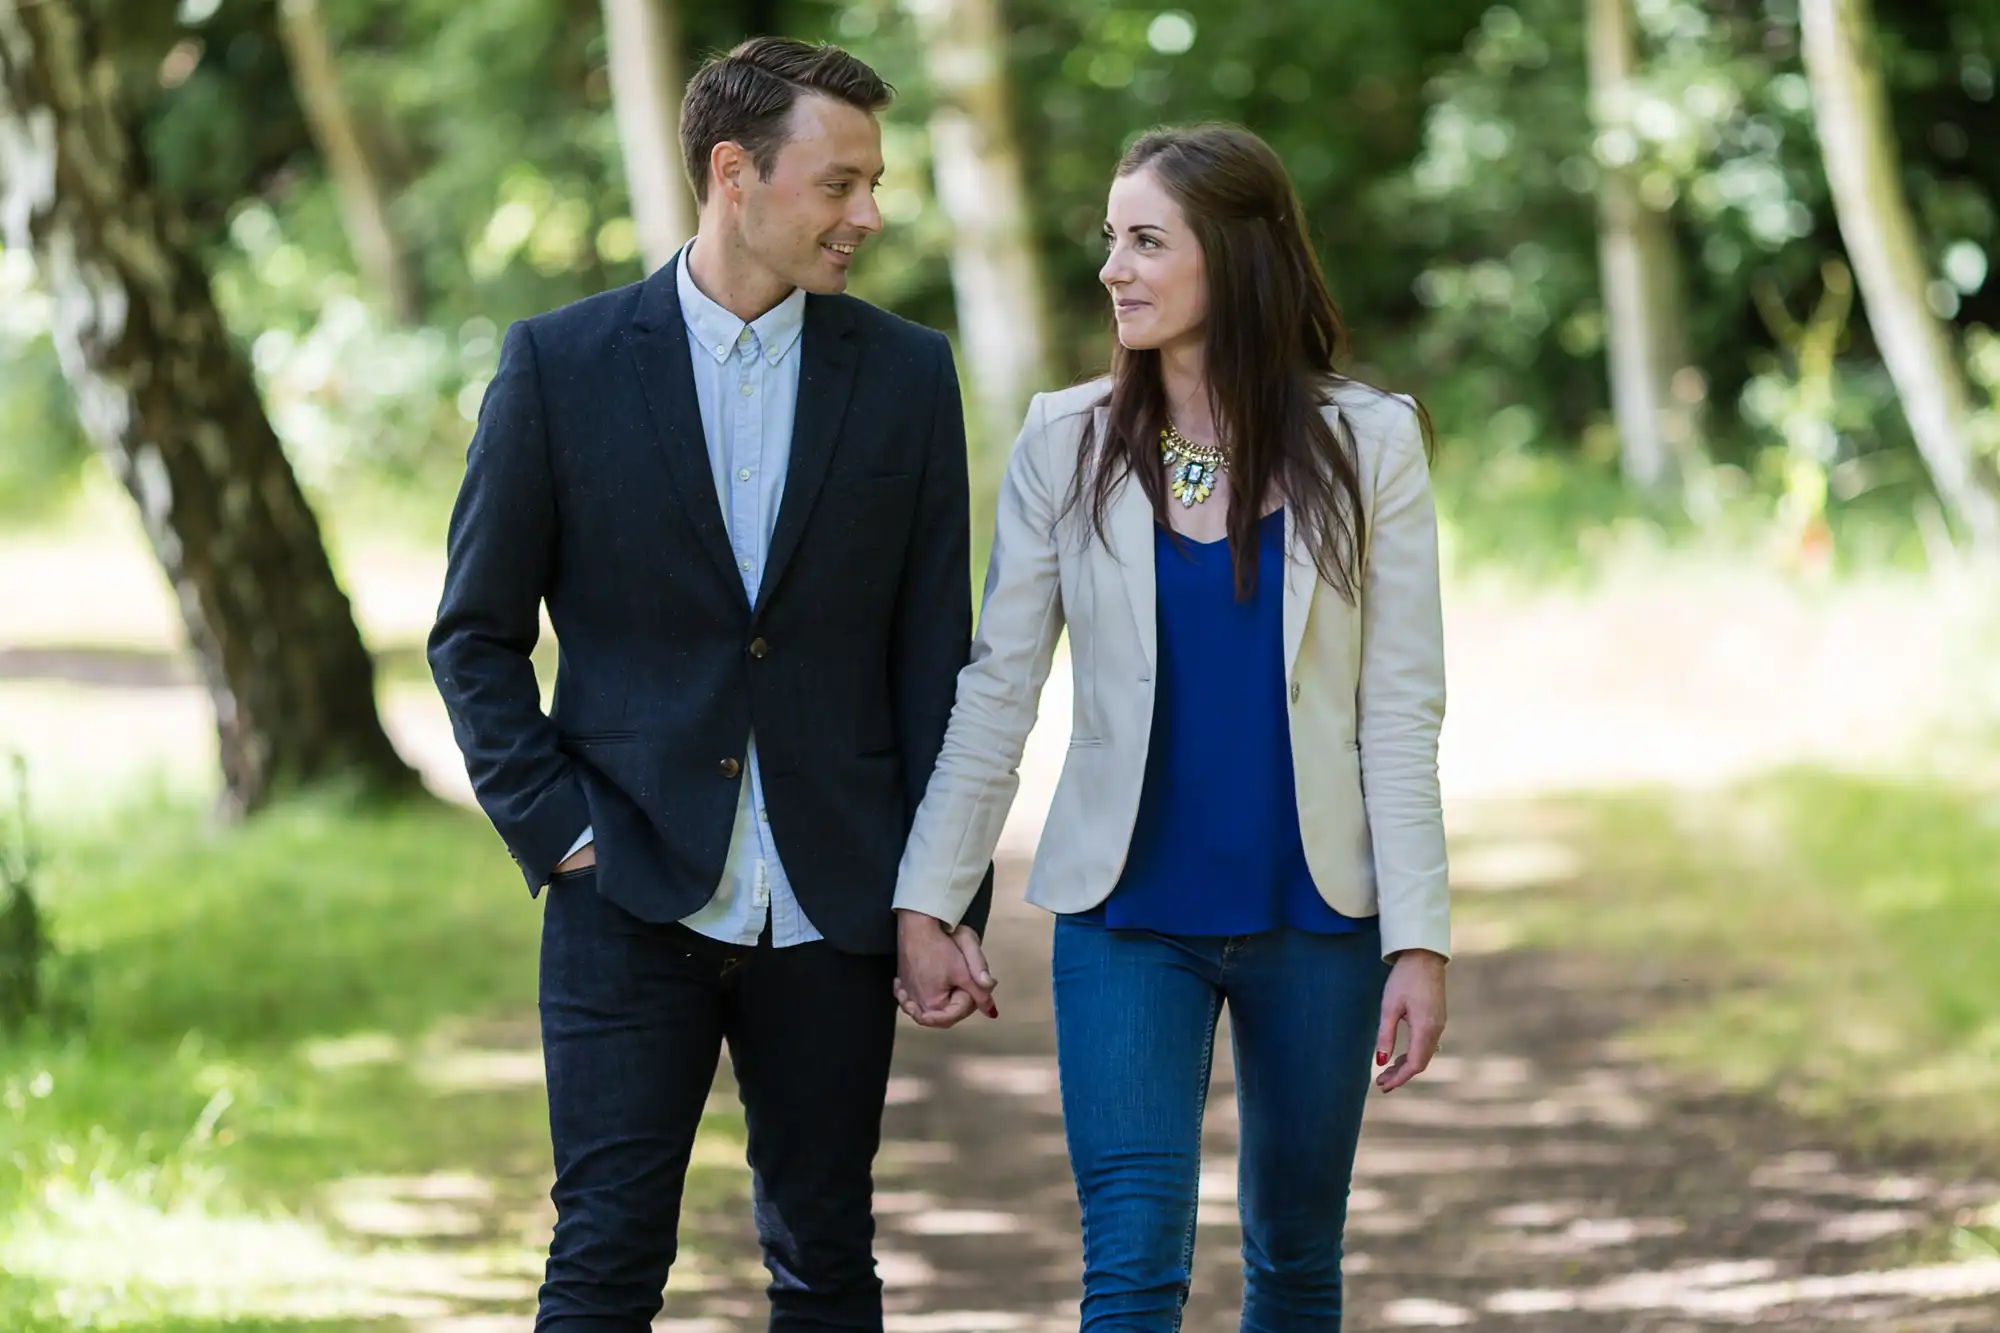 A man in a suit and a woman in a blazer and jeans walking hand in hand on a wooded path, smiling at each other.